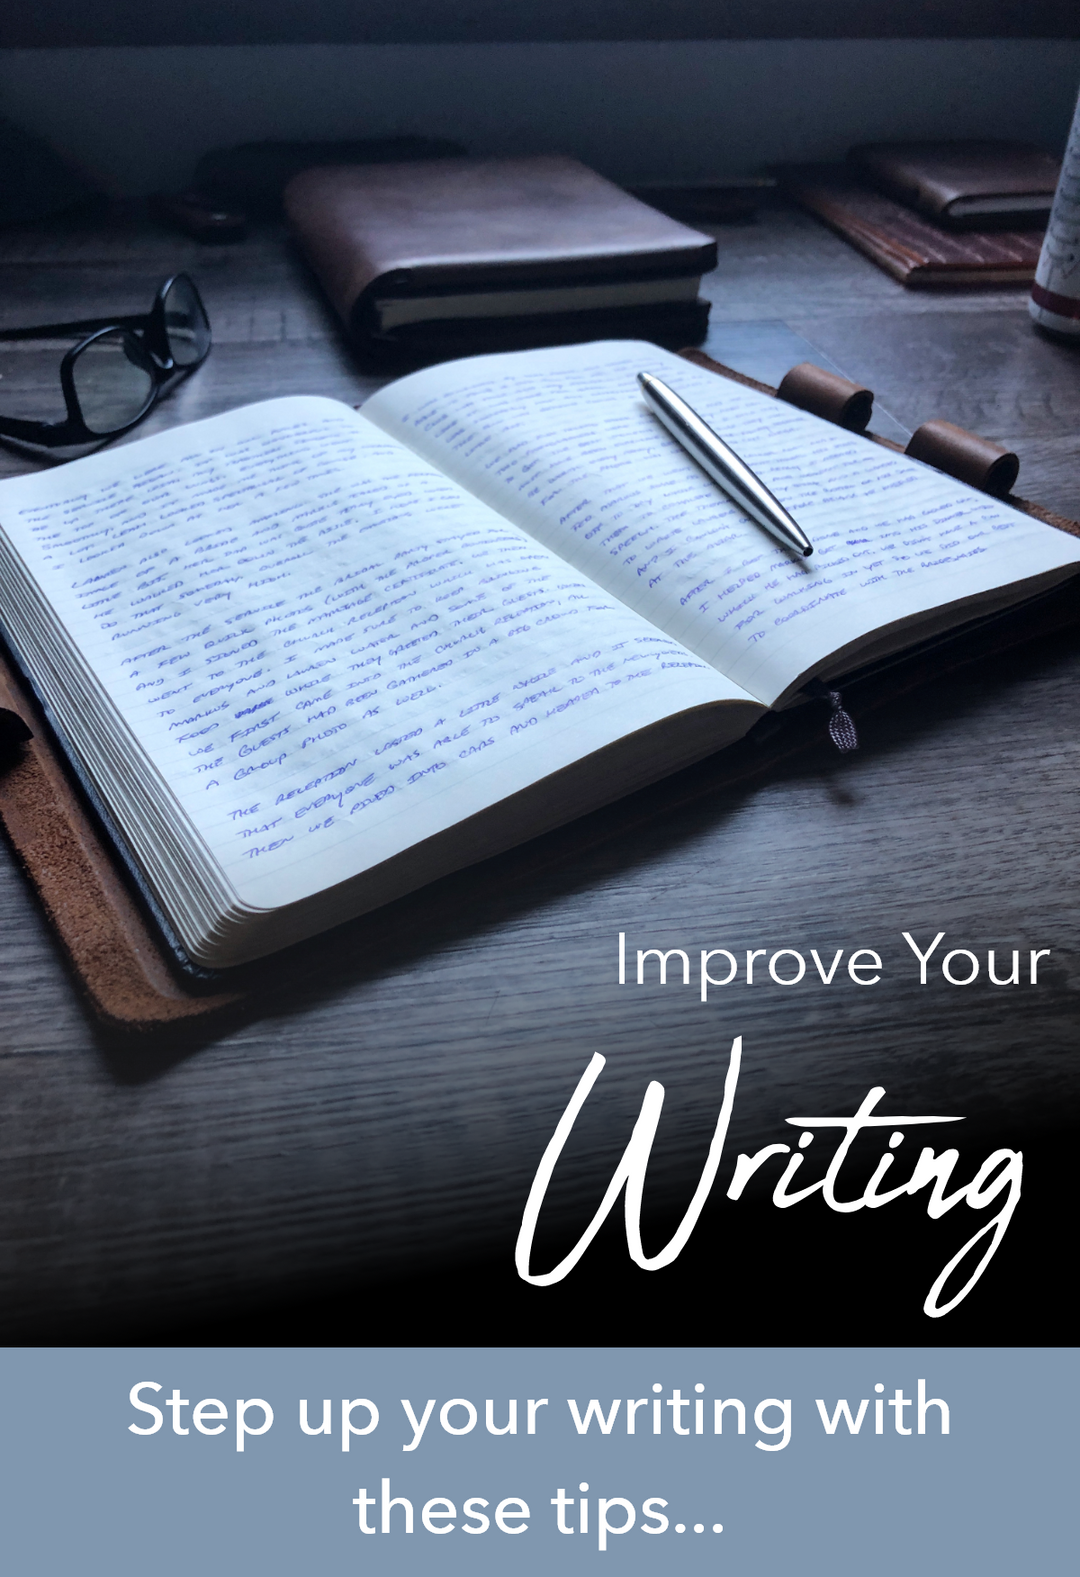 Improve your Writing - Step up your writing with these tips...